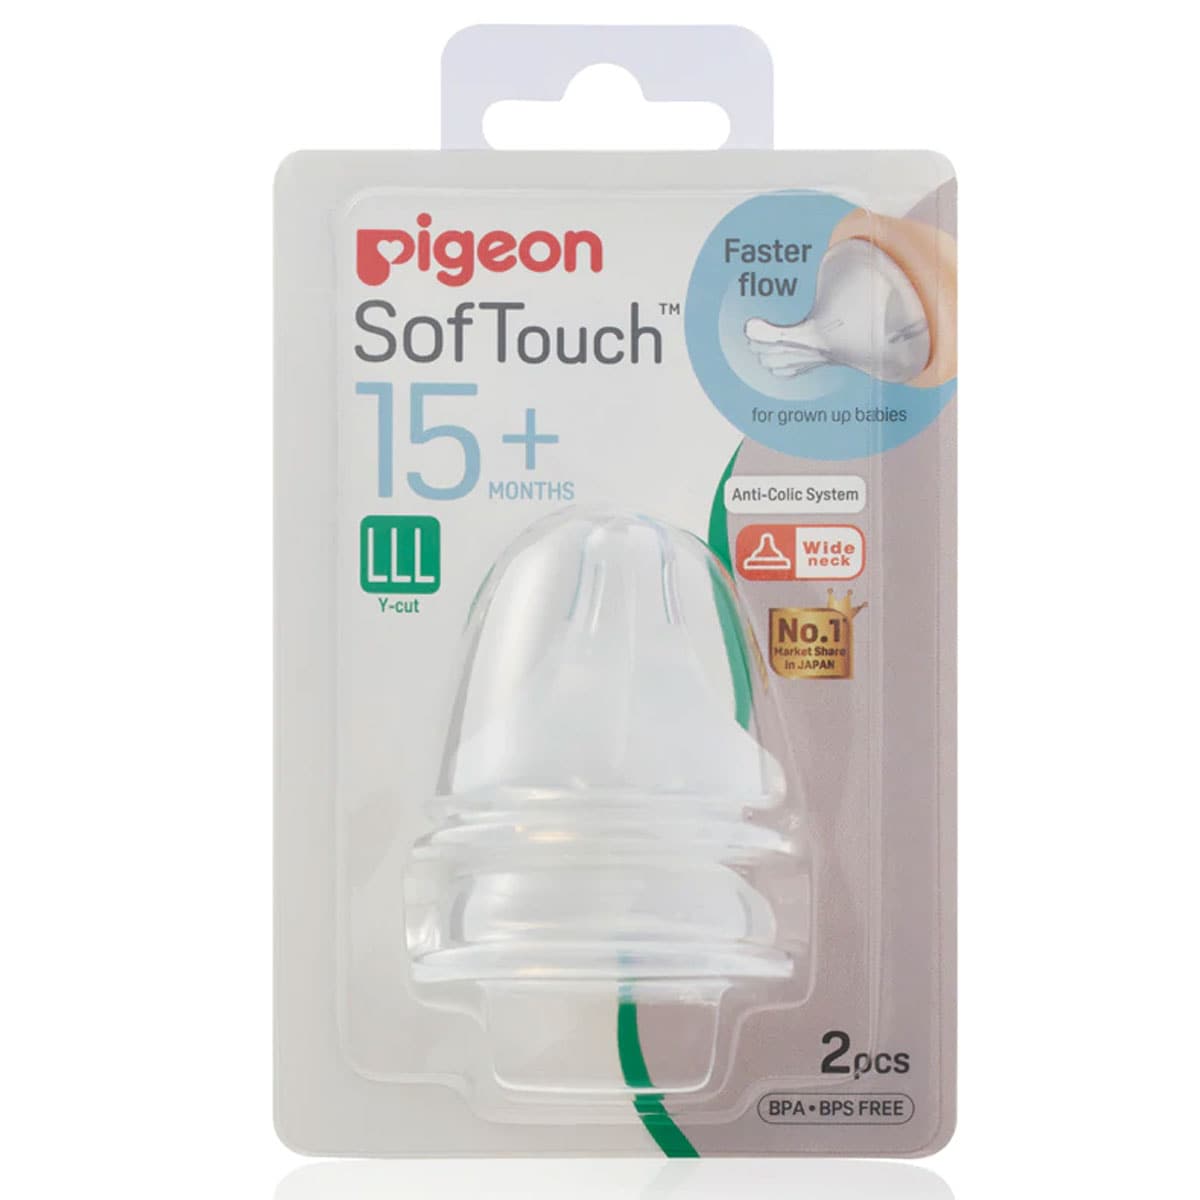 Pigeon SofTouch Peristaltic Plus Teat (LLL) 2 Pack